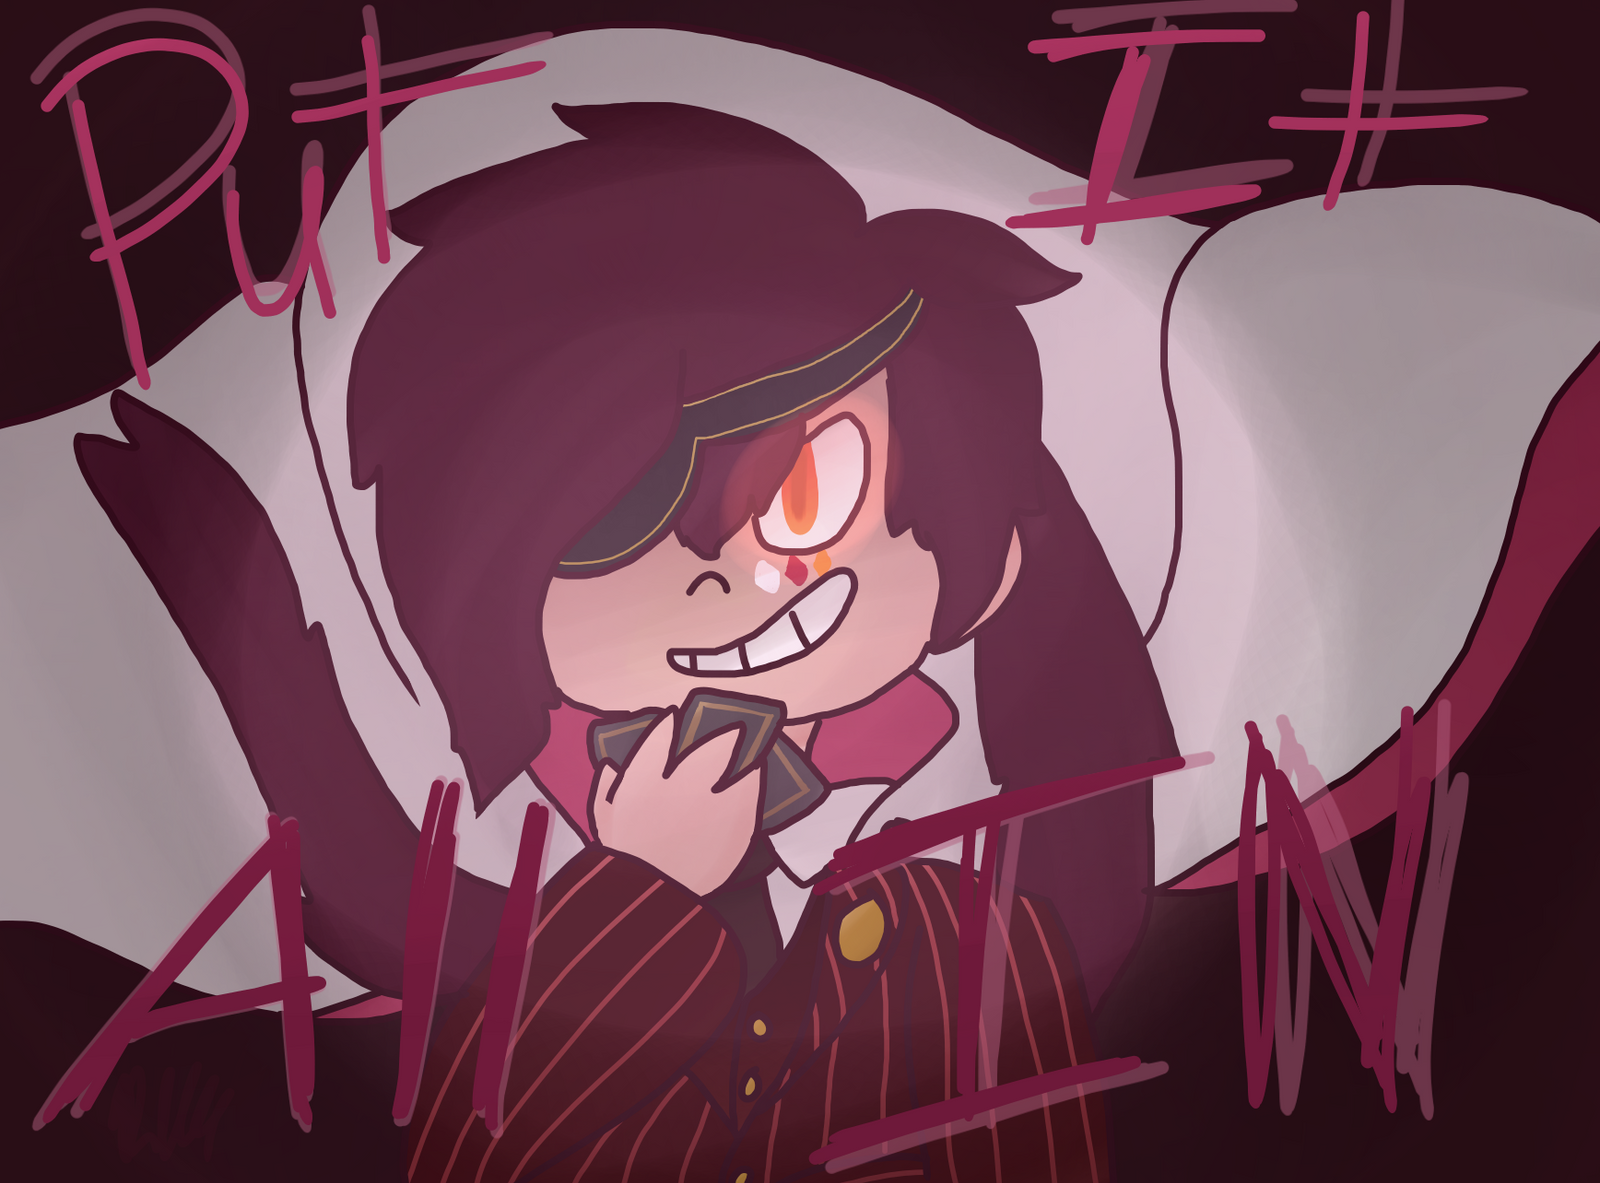 put_it_all_in_by_rosieoci-dbyu62c.png